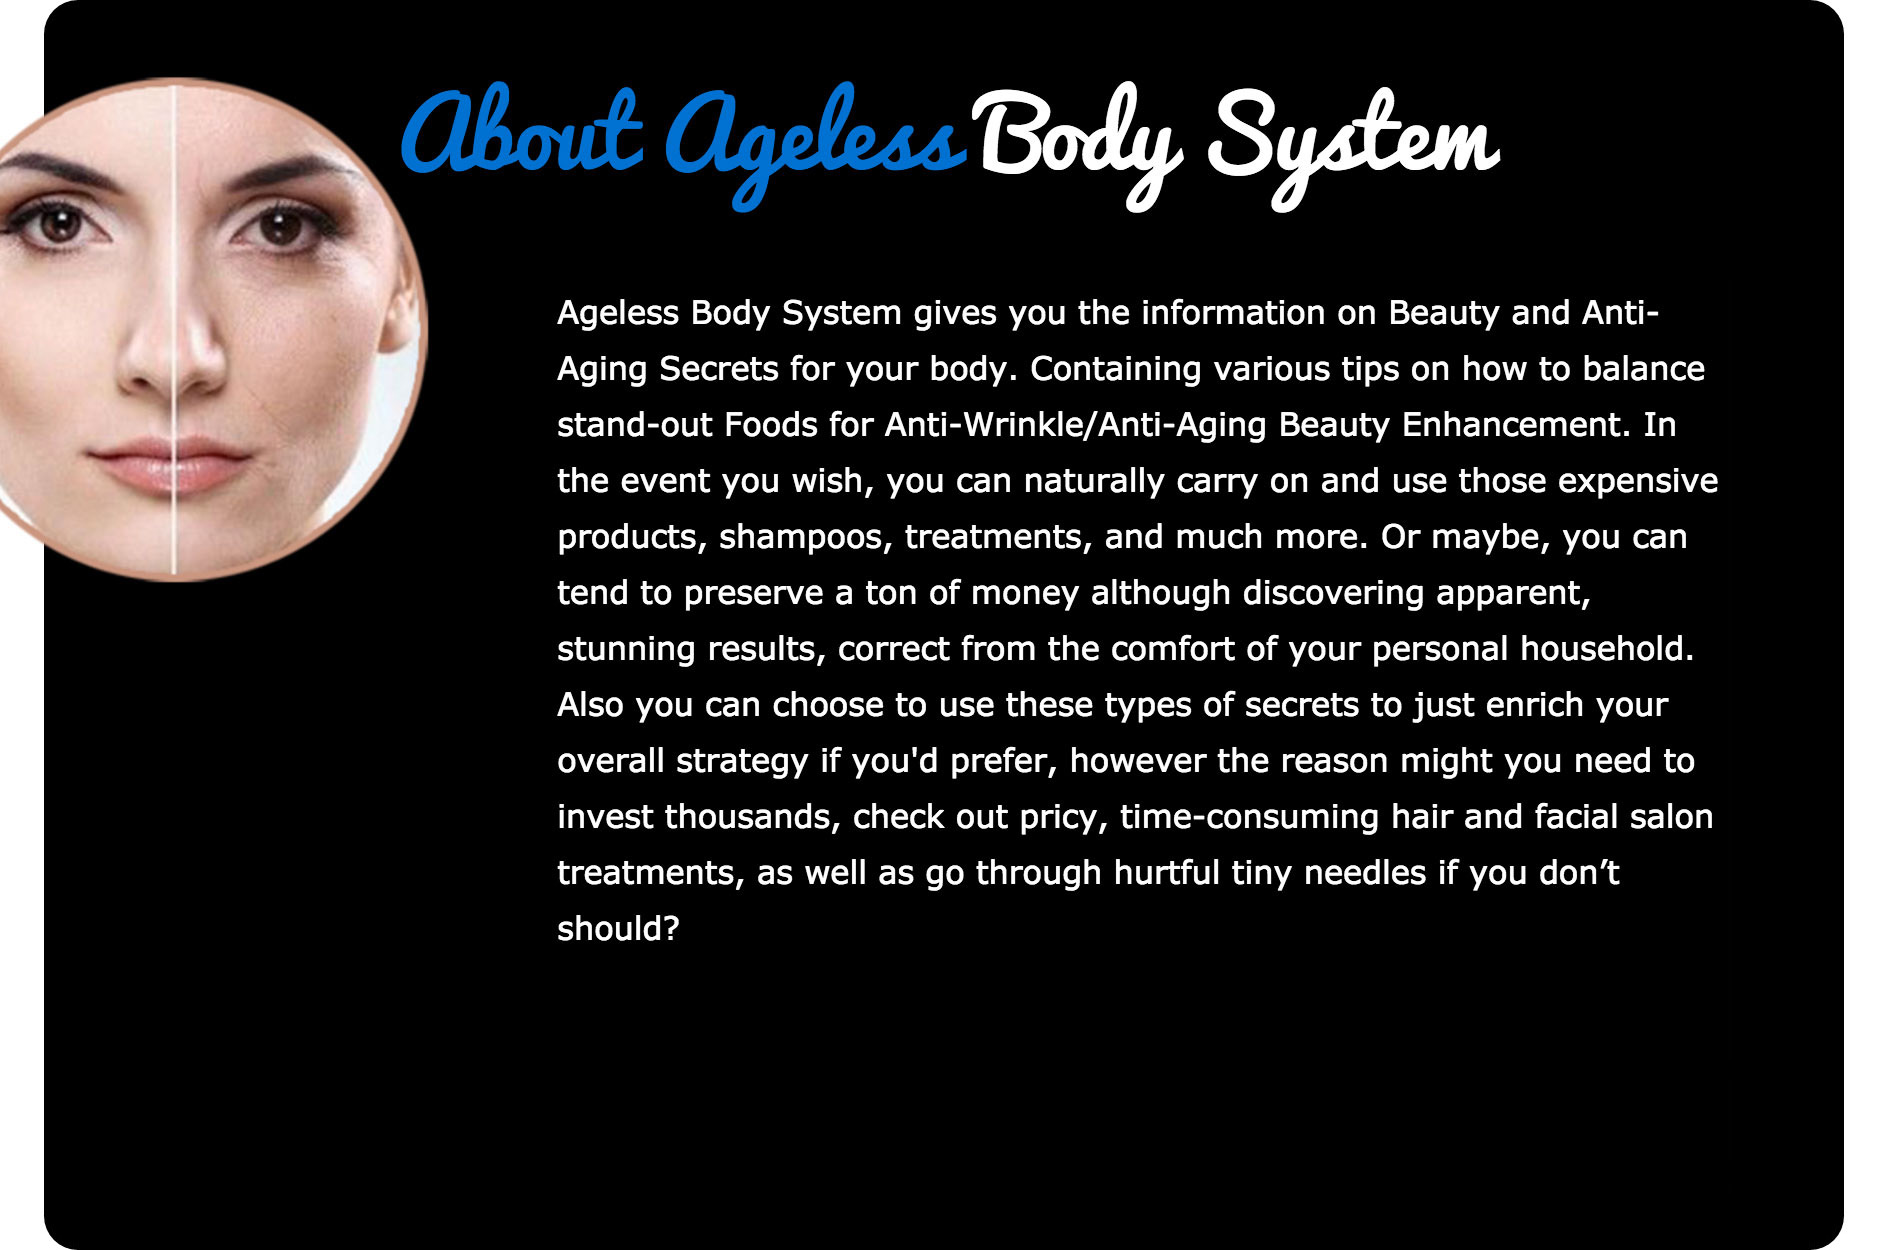 The Ageless Body System is an All-In-One System that revolutionizes Anti-Aging and that not only gu